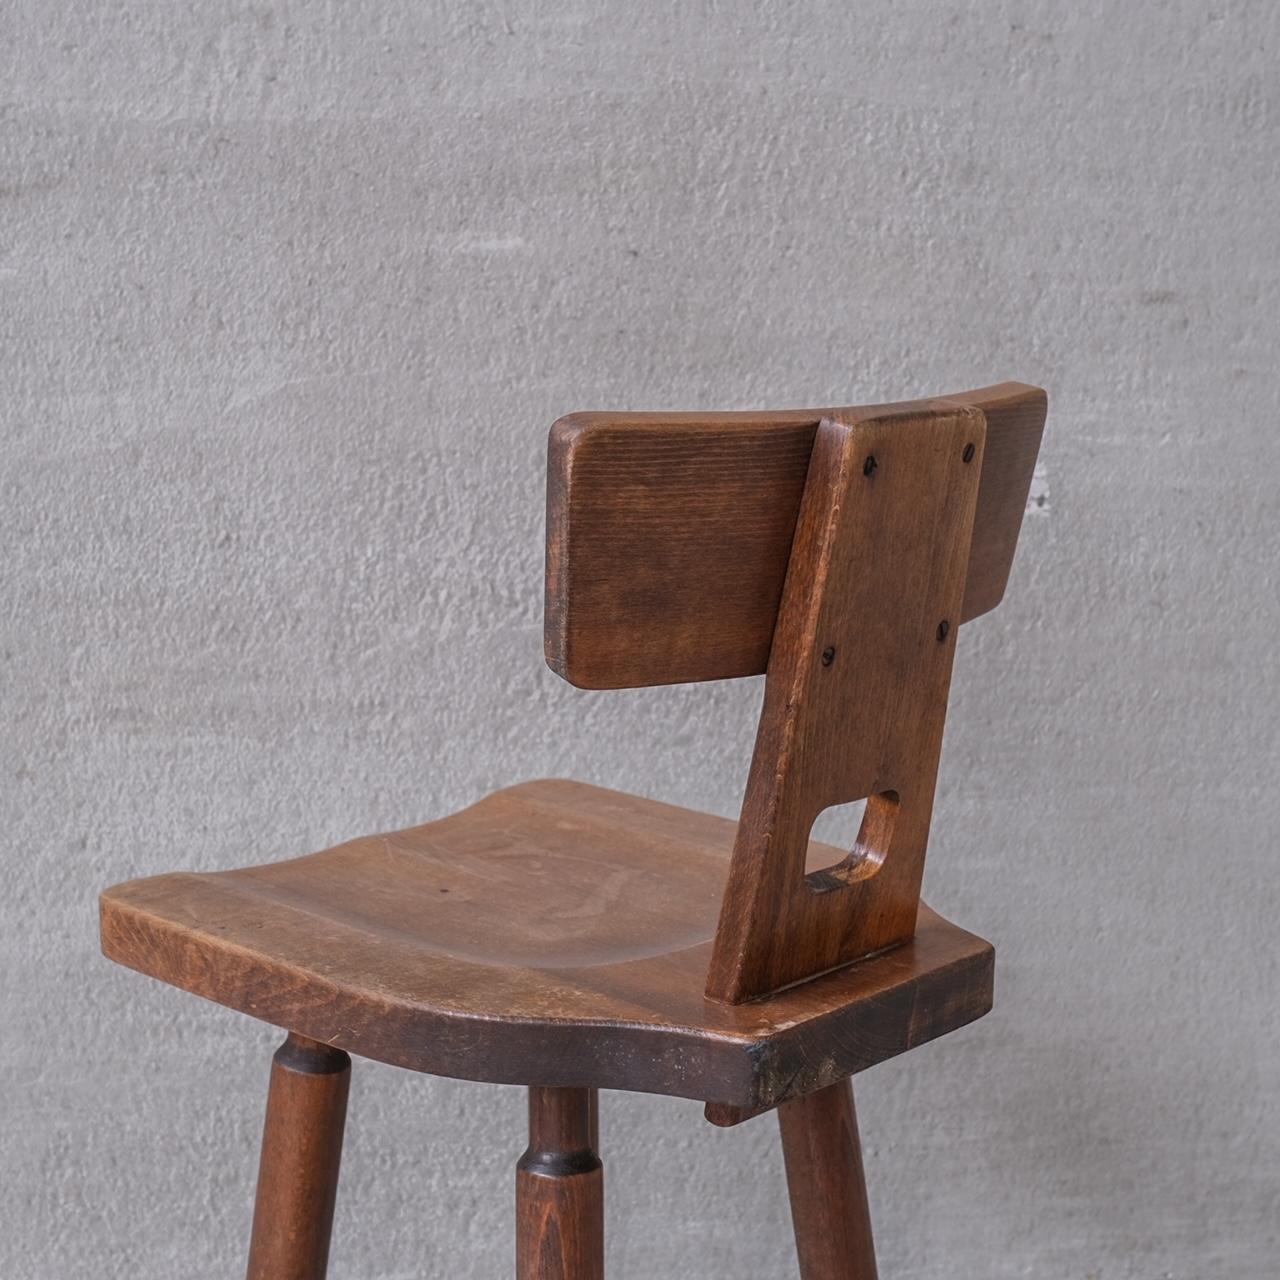 Brutalist Wooden Dutch Midcentury Bar Stools '20 Available' 2